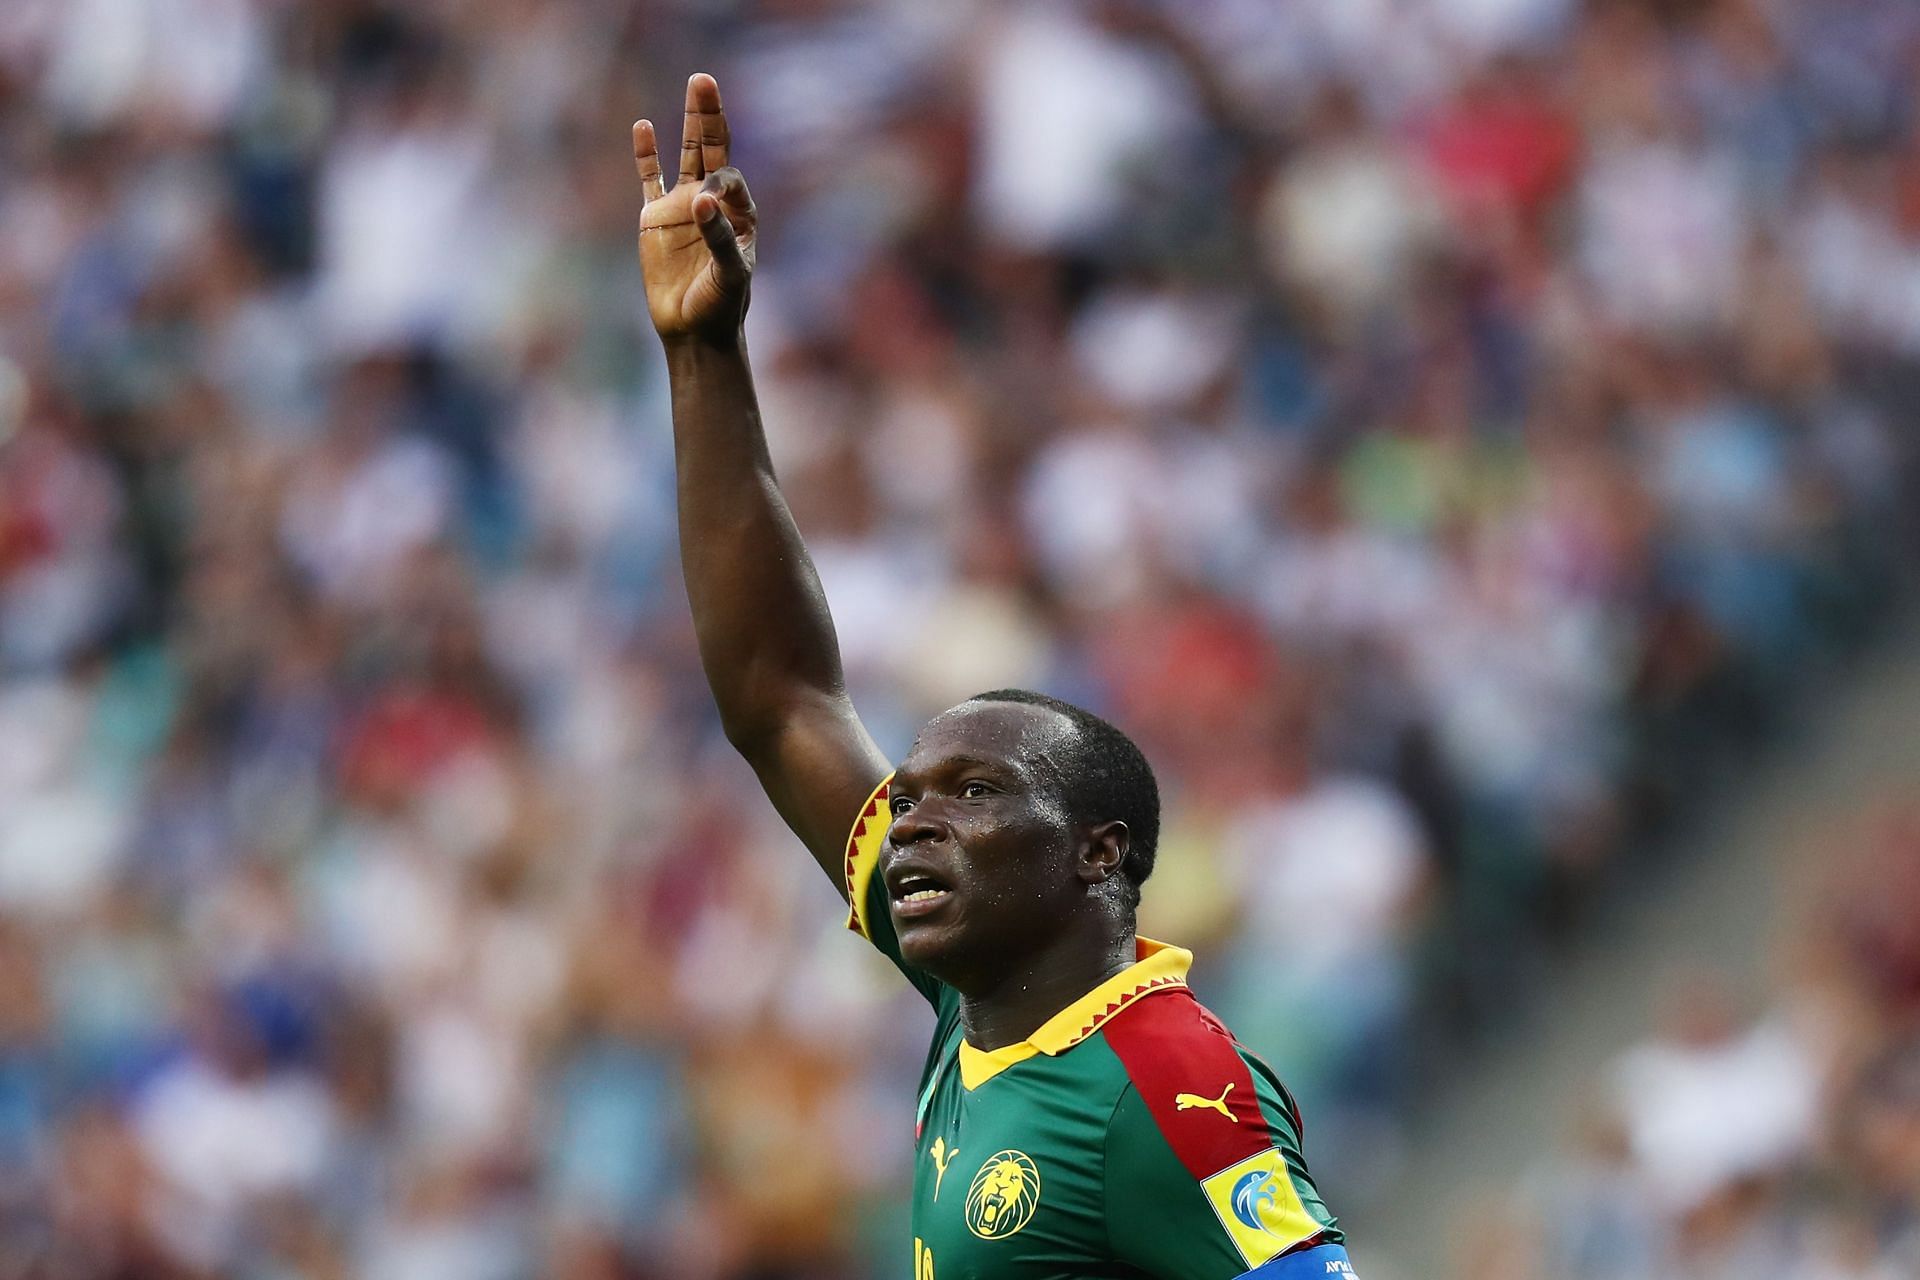 Cameroon will face Comoros on Monday - Africa Cup of Nations 2021